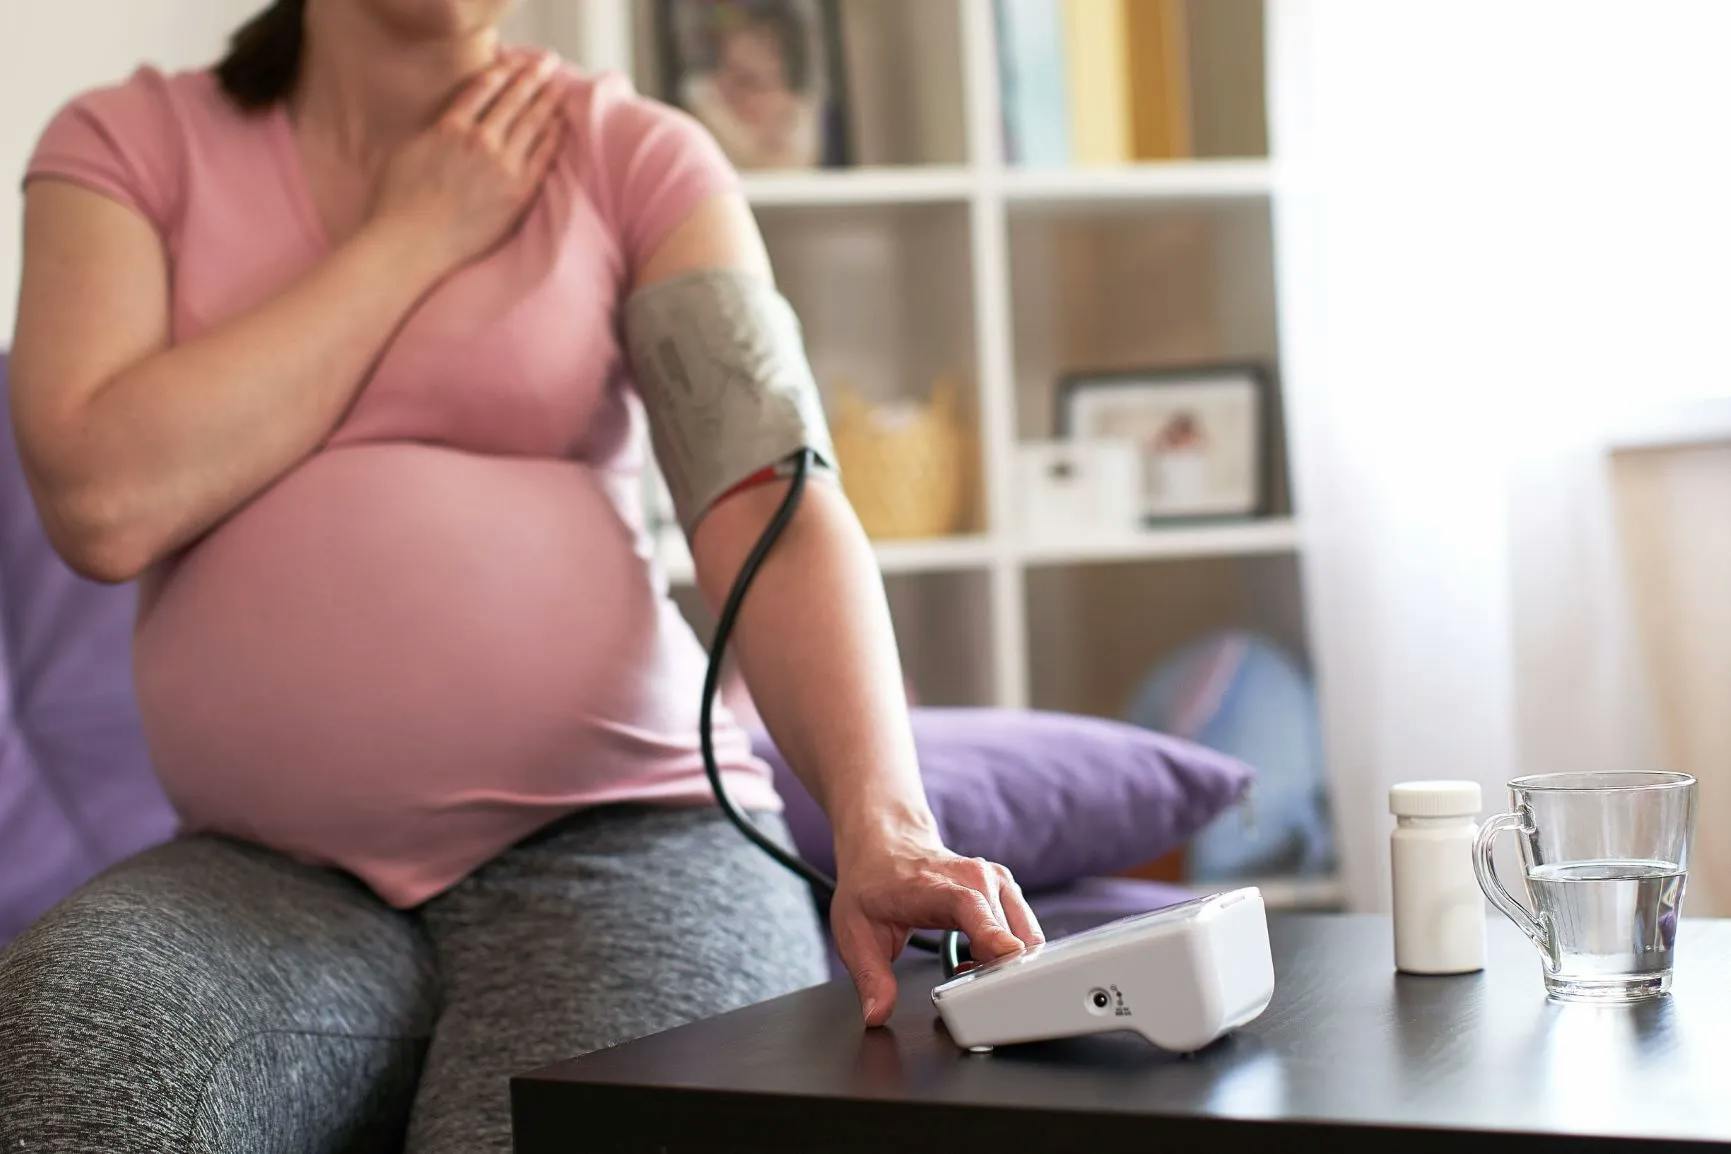 Pregnant woman monitoring heart rate